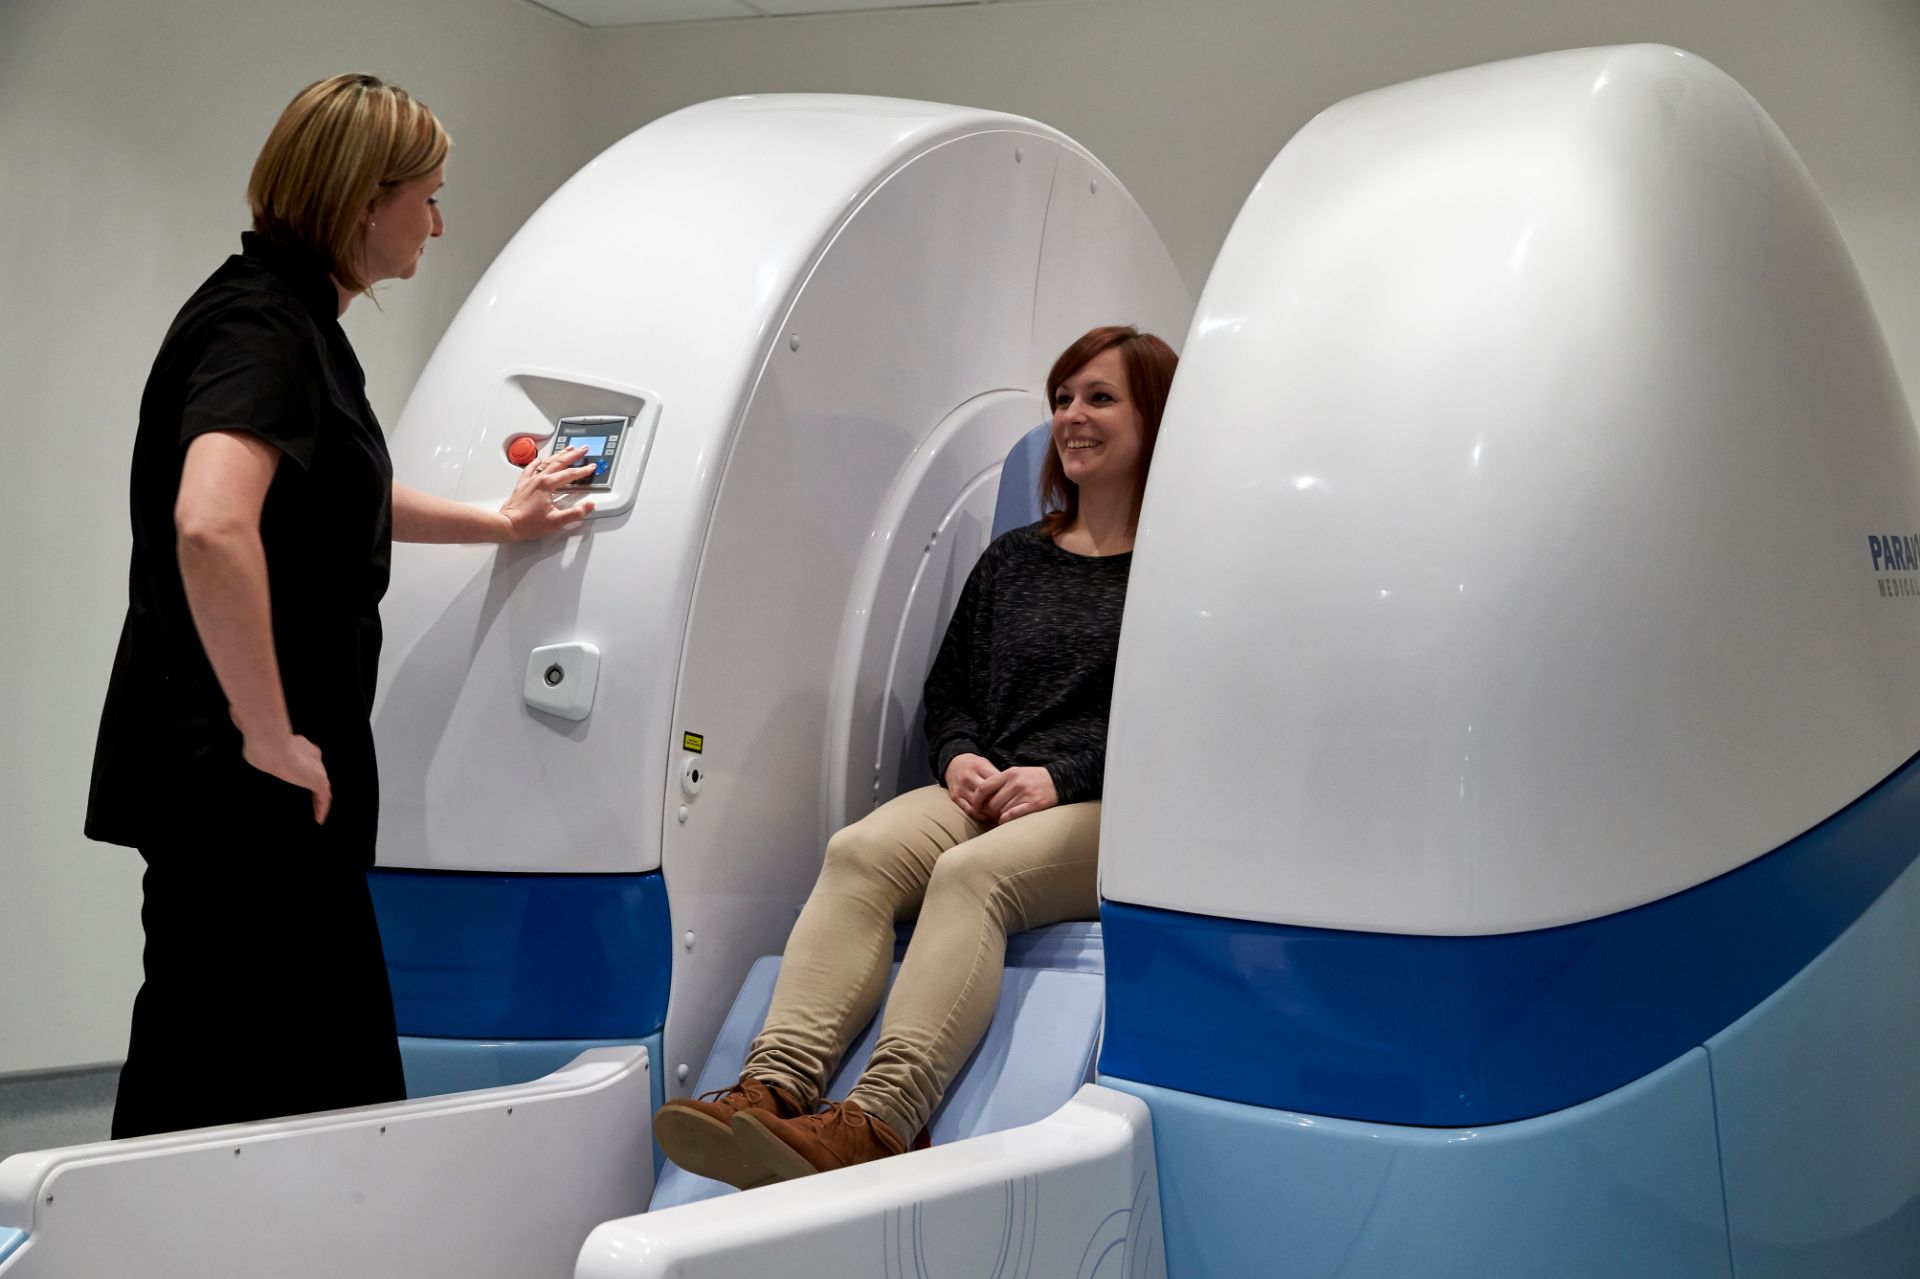 What You Need to Know About Open and Upright MRI Scans